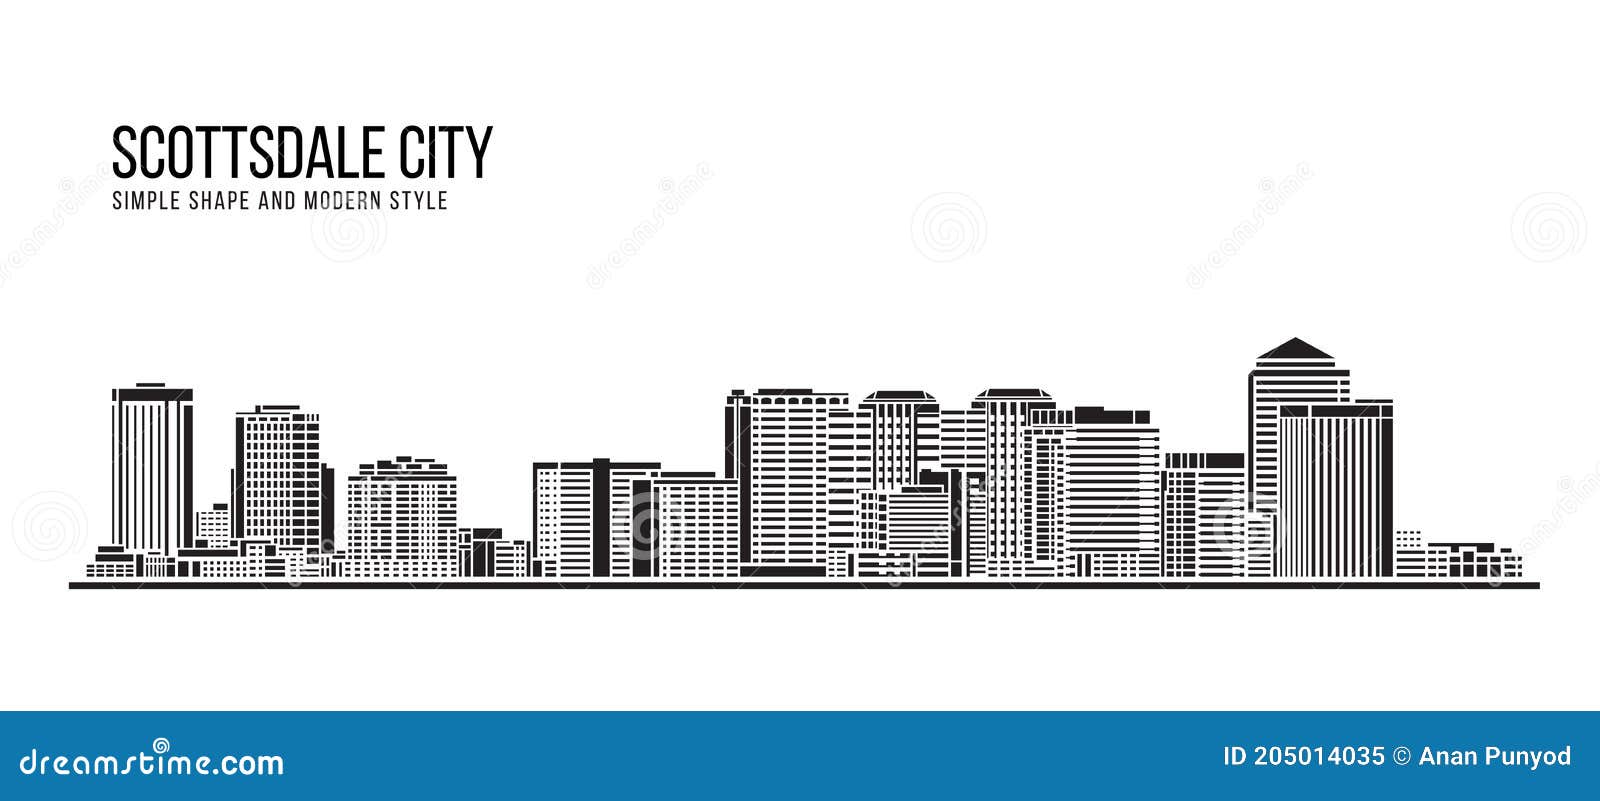 cityscape building abstract simple  and modern style art   - scottsdale city